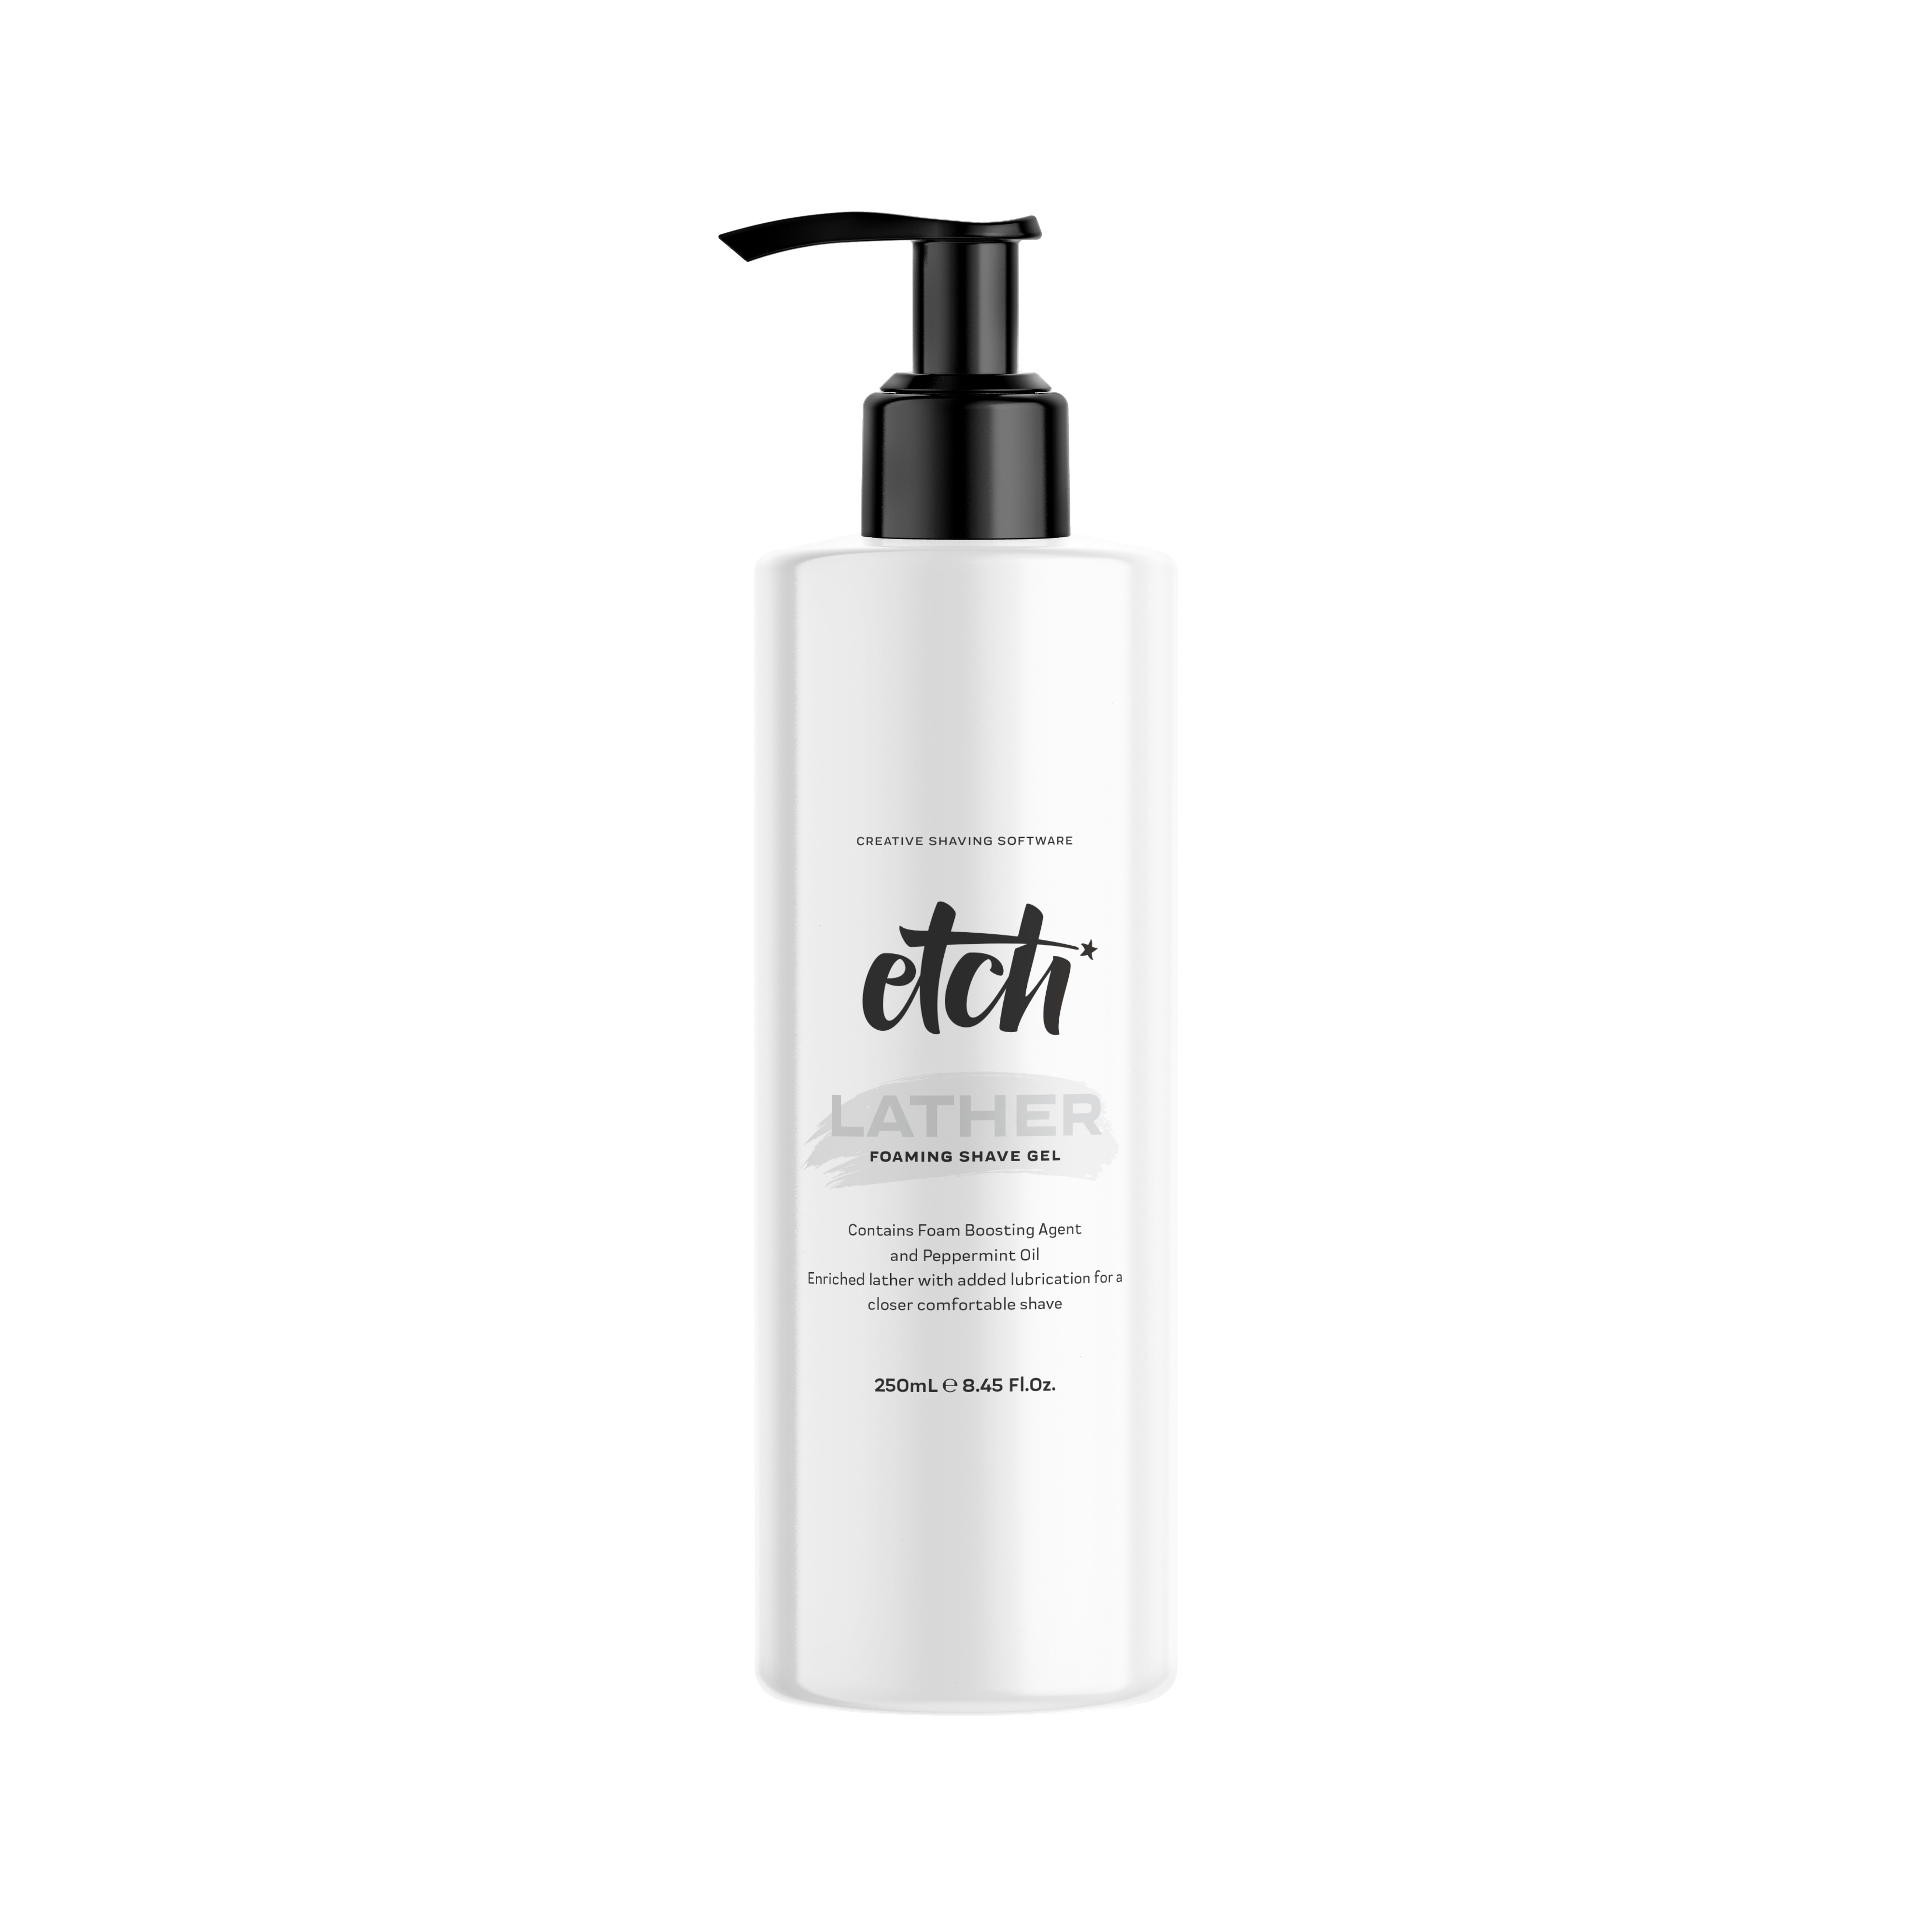 Etch Lather Foaming Shave Gel